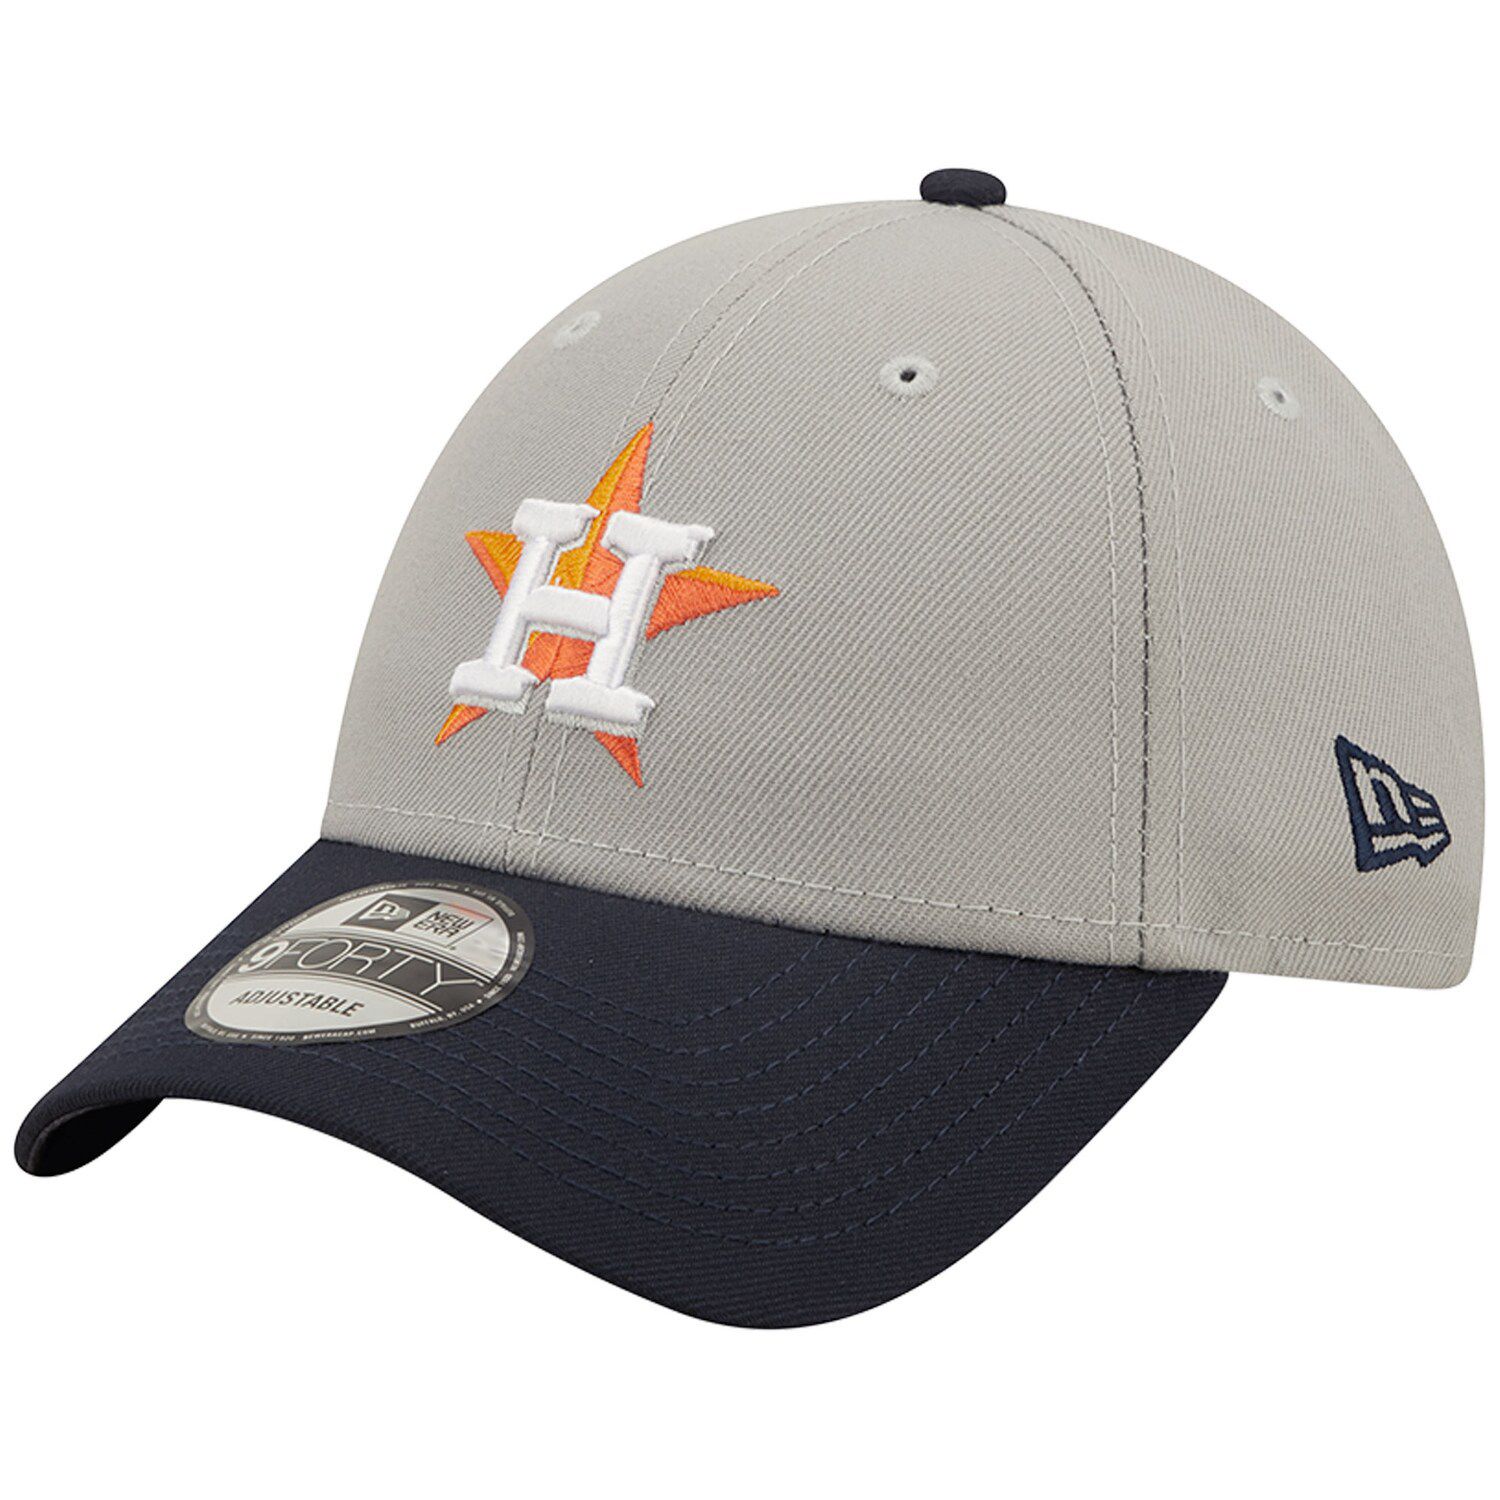 Houston Astros 2022 World Series Champions 9FORTY Snapback Hat, Gray, by New Era